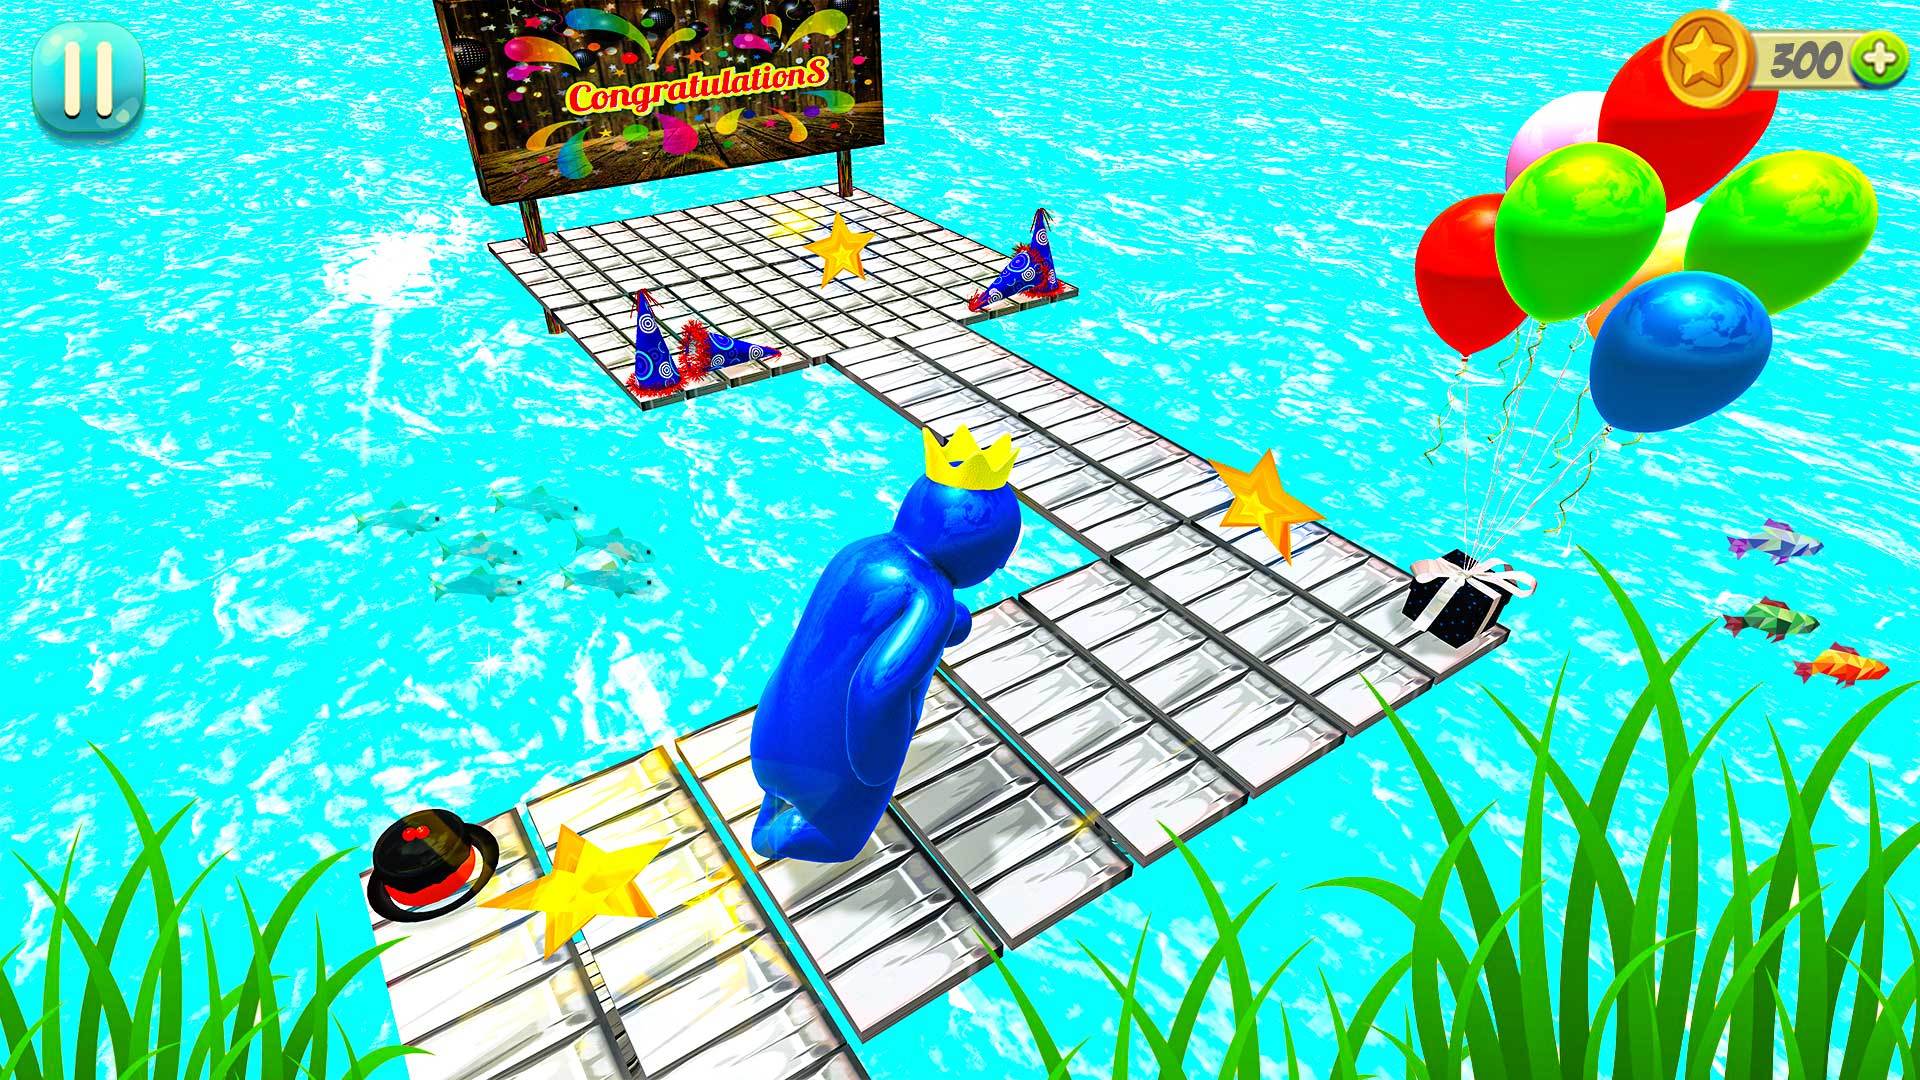 Rainbow Friends Blue FNF Game APK for Android Download